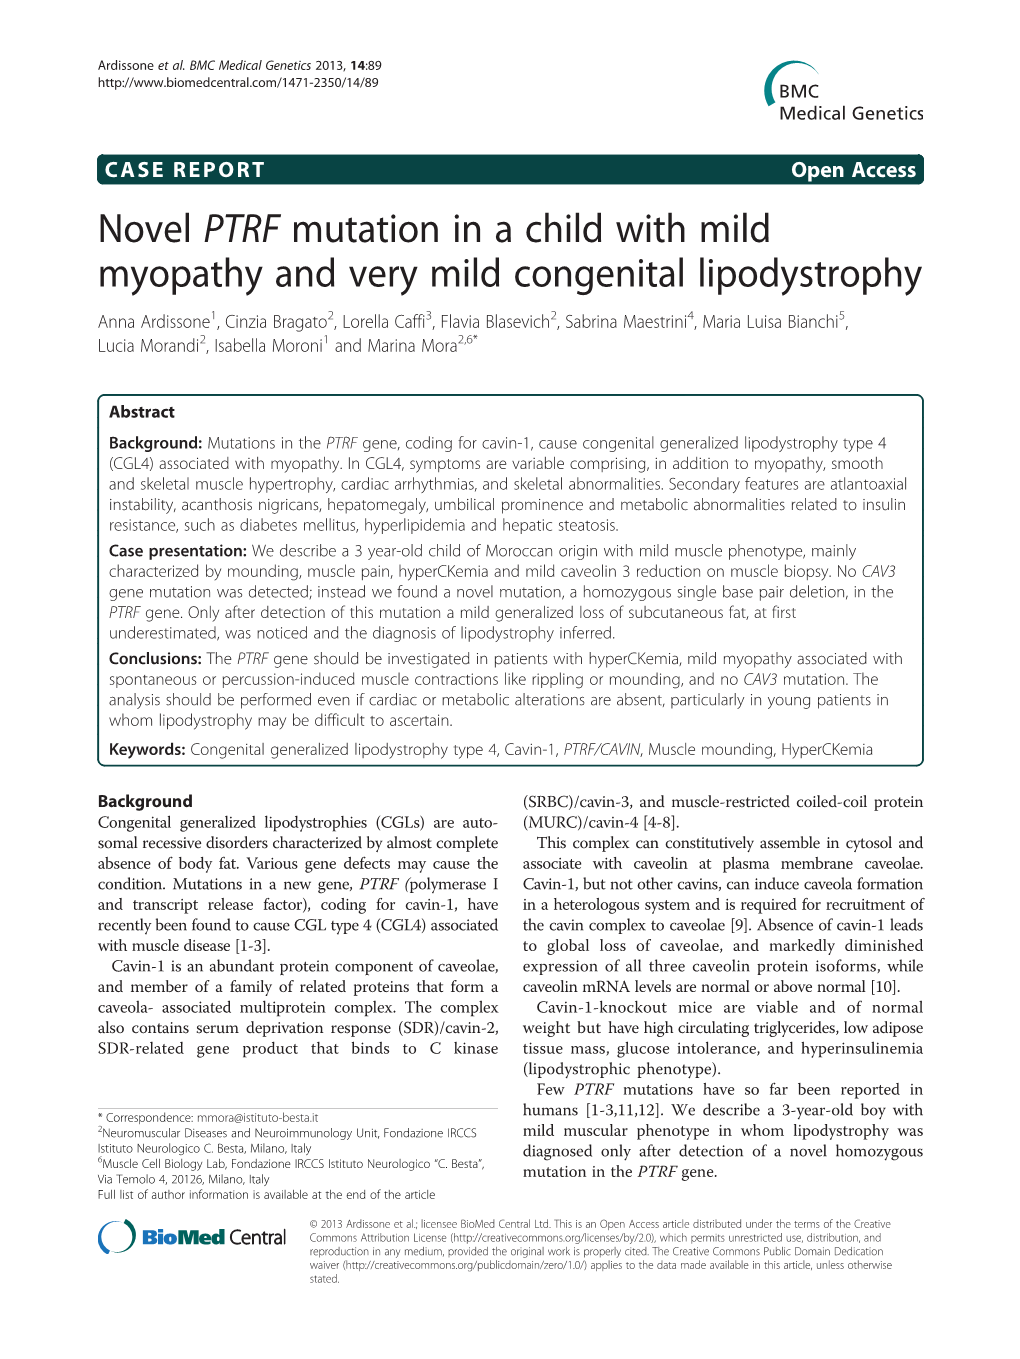 Novel PTRF Mutation in a Child with Mild Myopathy and Very Mild